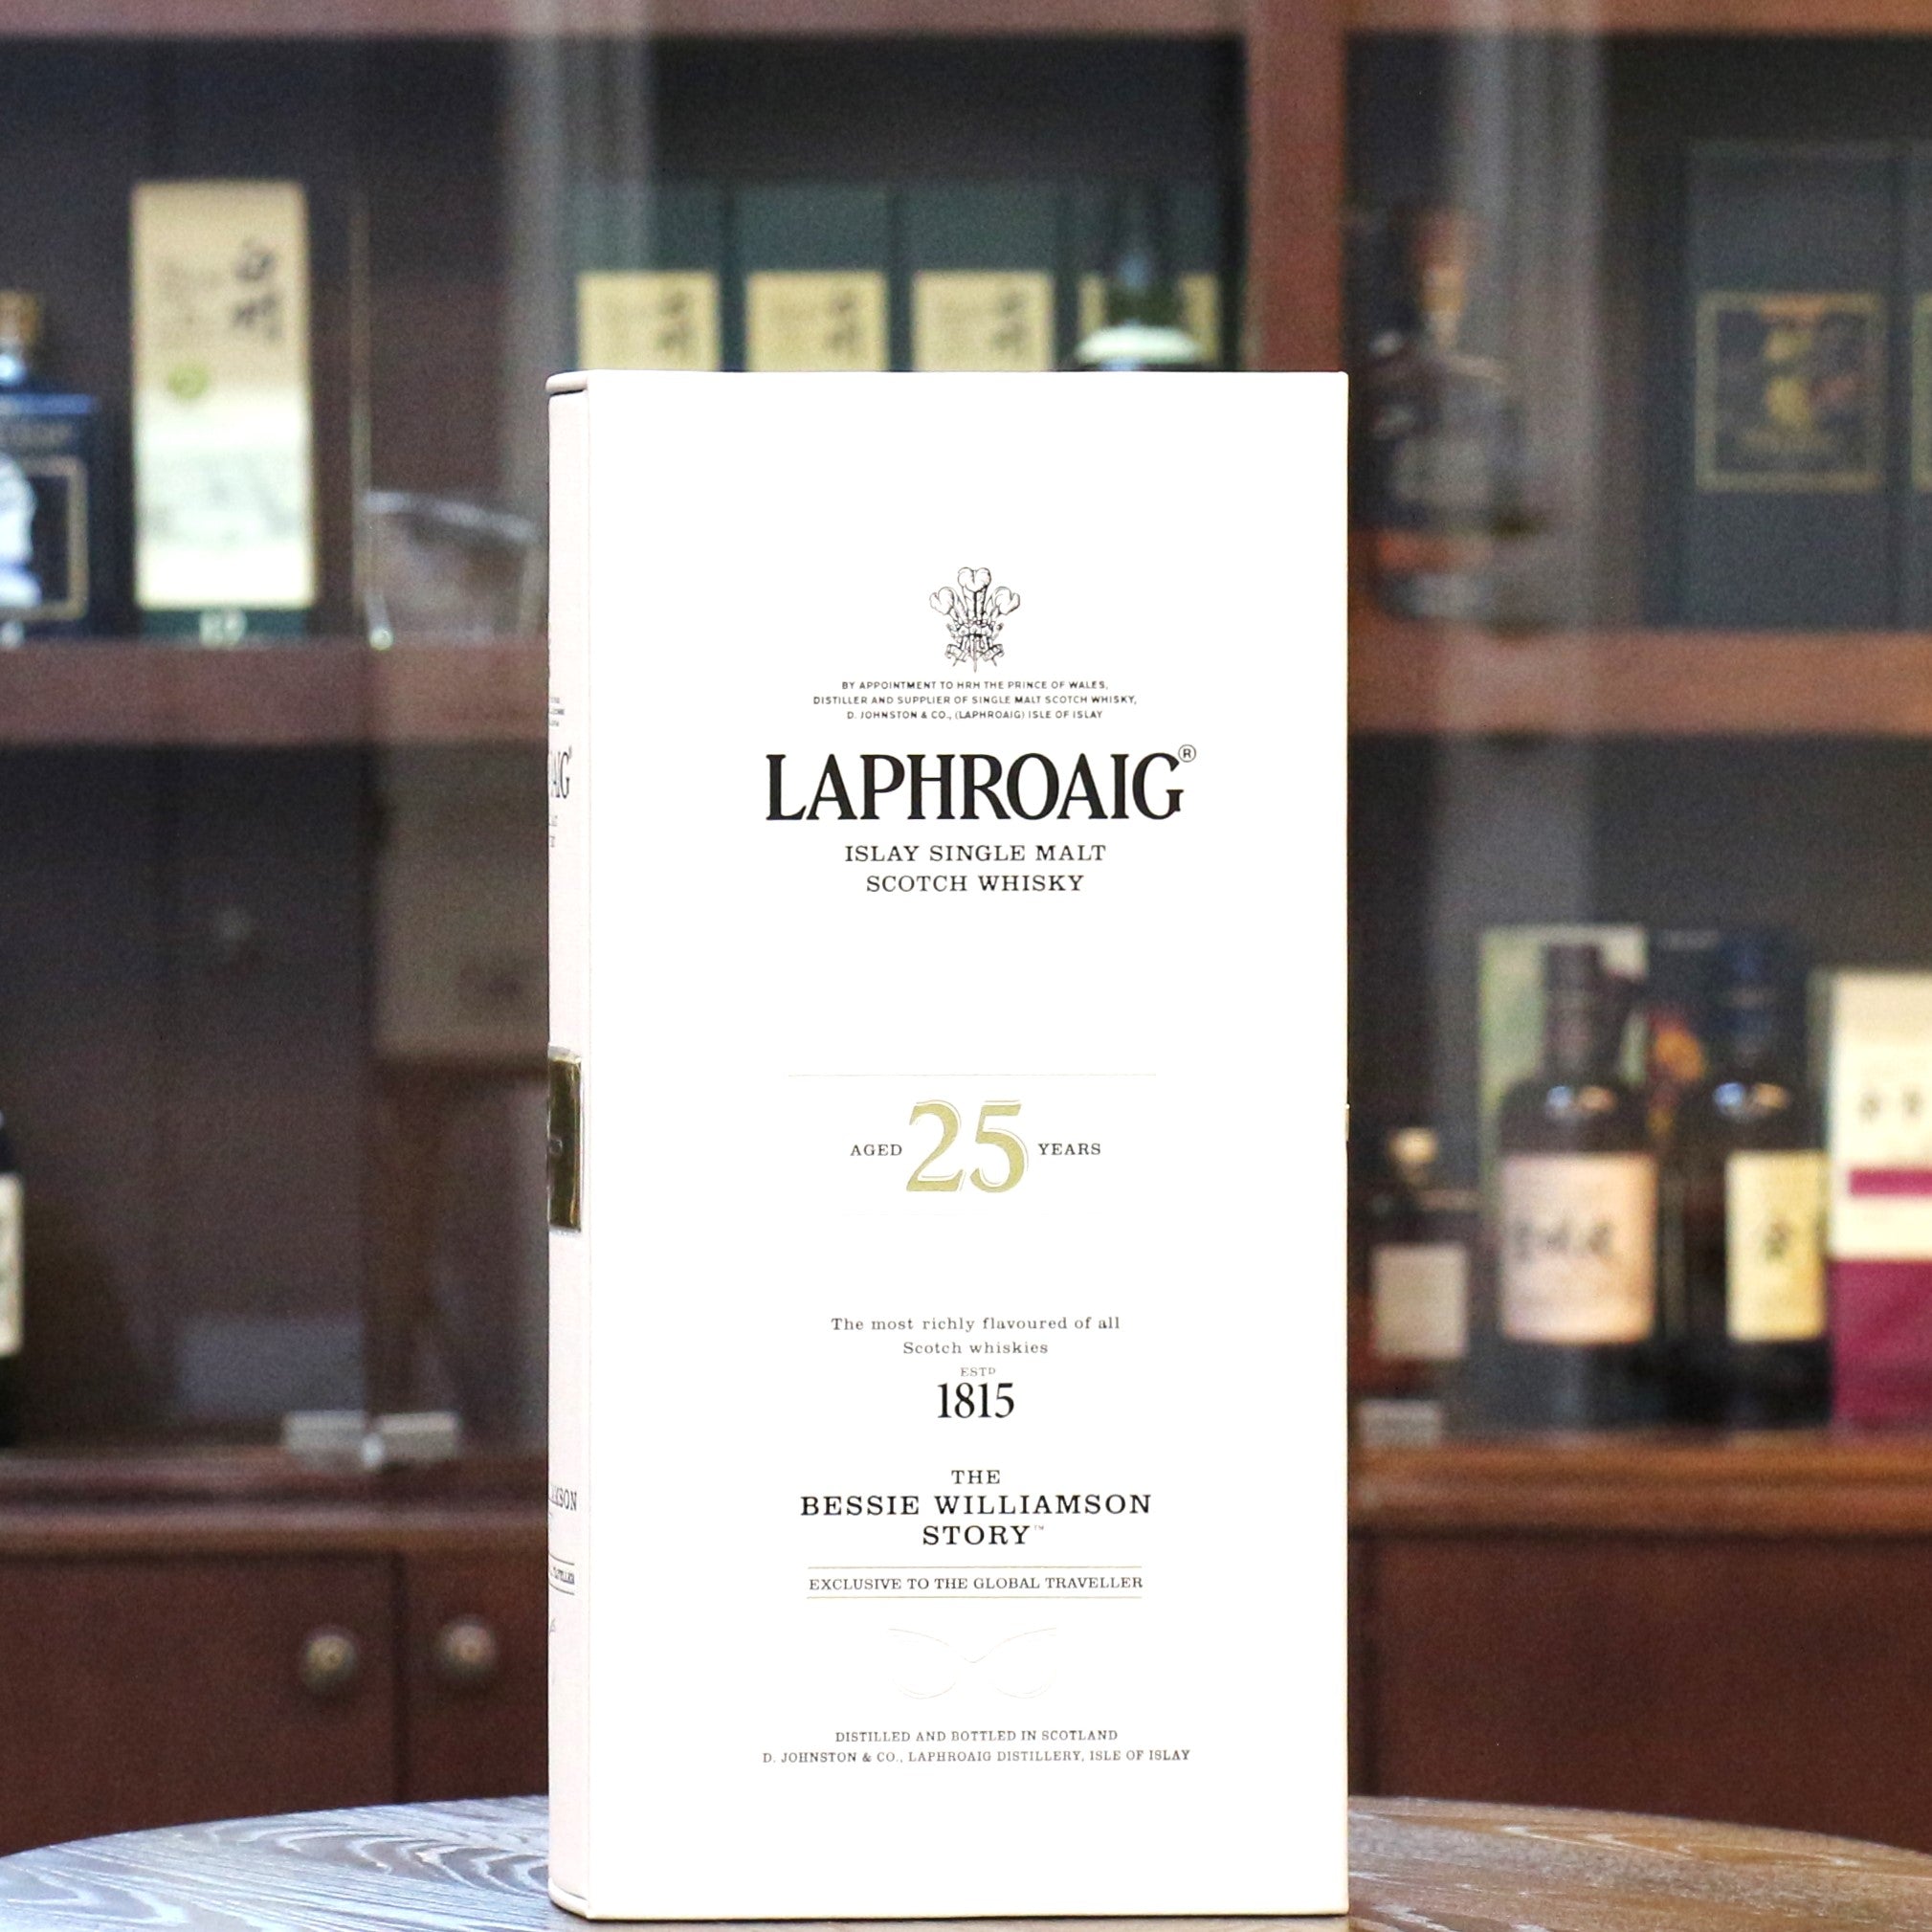 This Laphroaig 25 exclusive to the global traveller